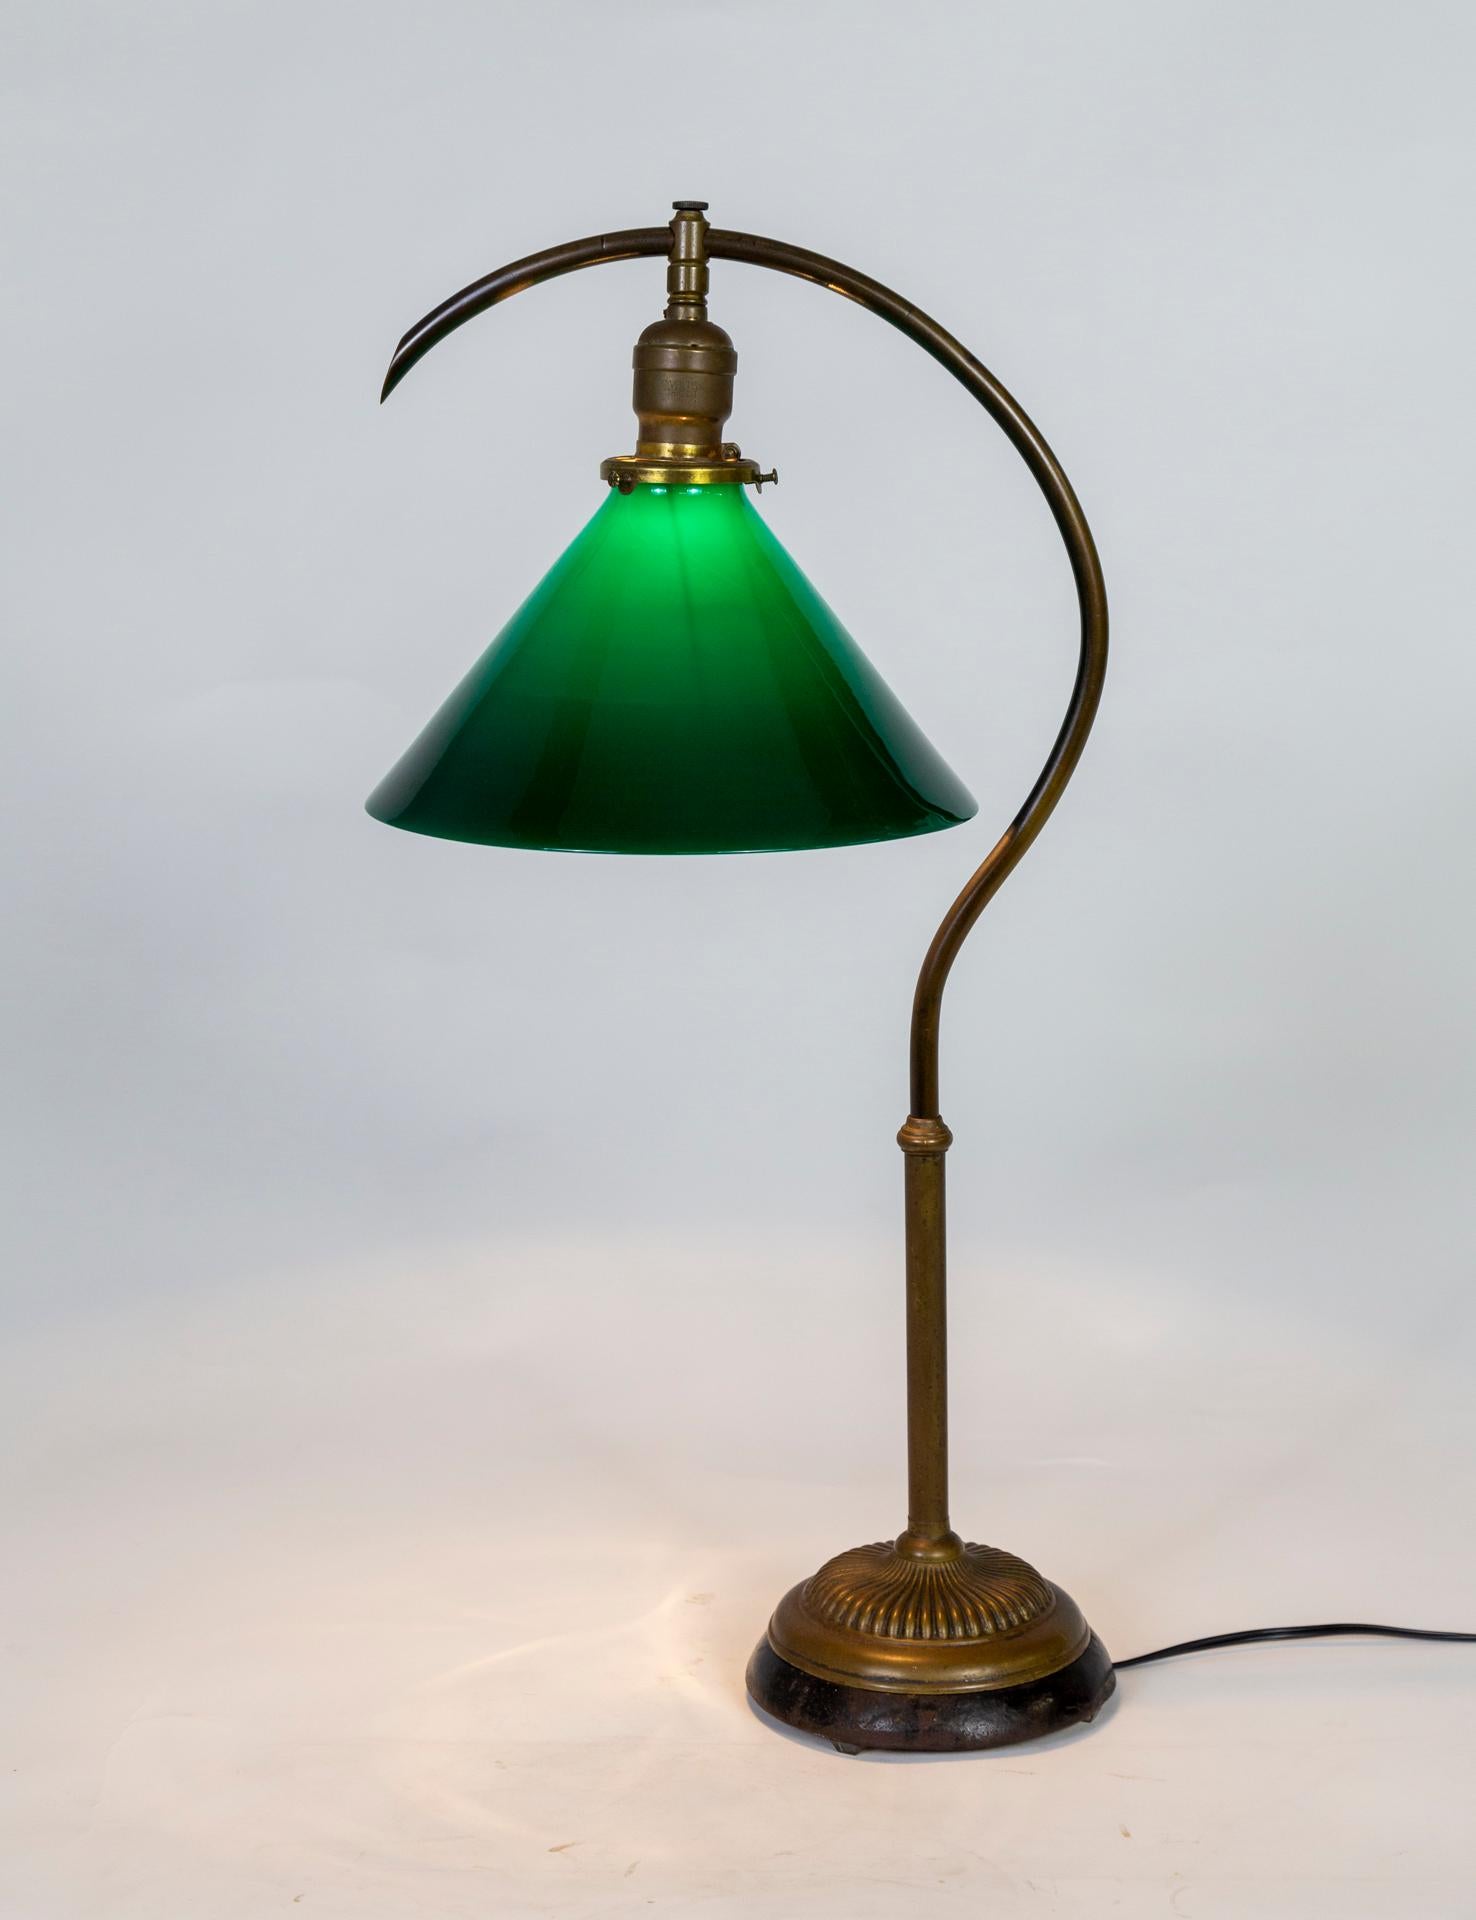 An adjustable Banker's lamp with a cone shaped, green shade fabricated by Faries Lamp Co. The elegant, curved pipe stem has telescoping height adjustment and the shade holder, with detailed set screws, swivels direction. The gadrooned brass base